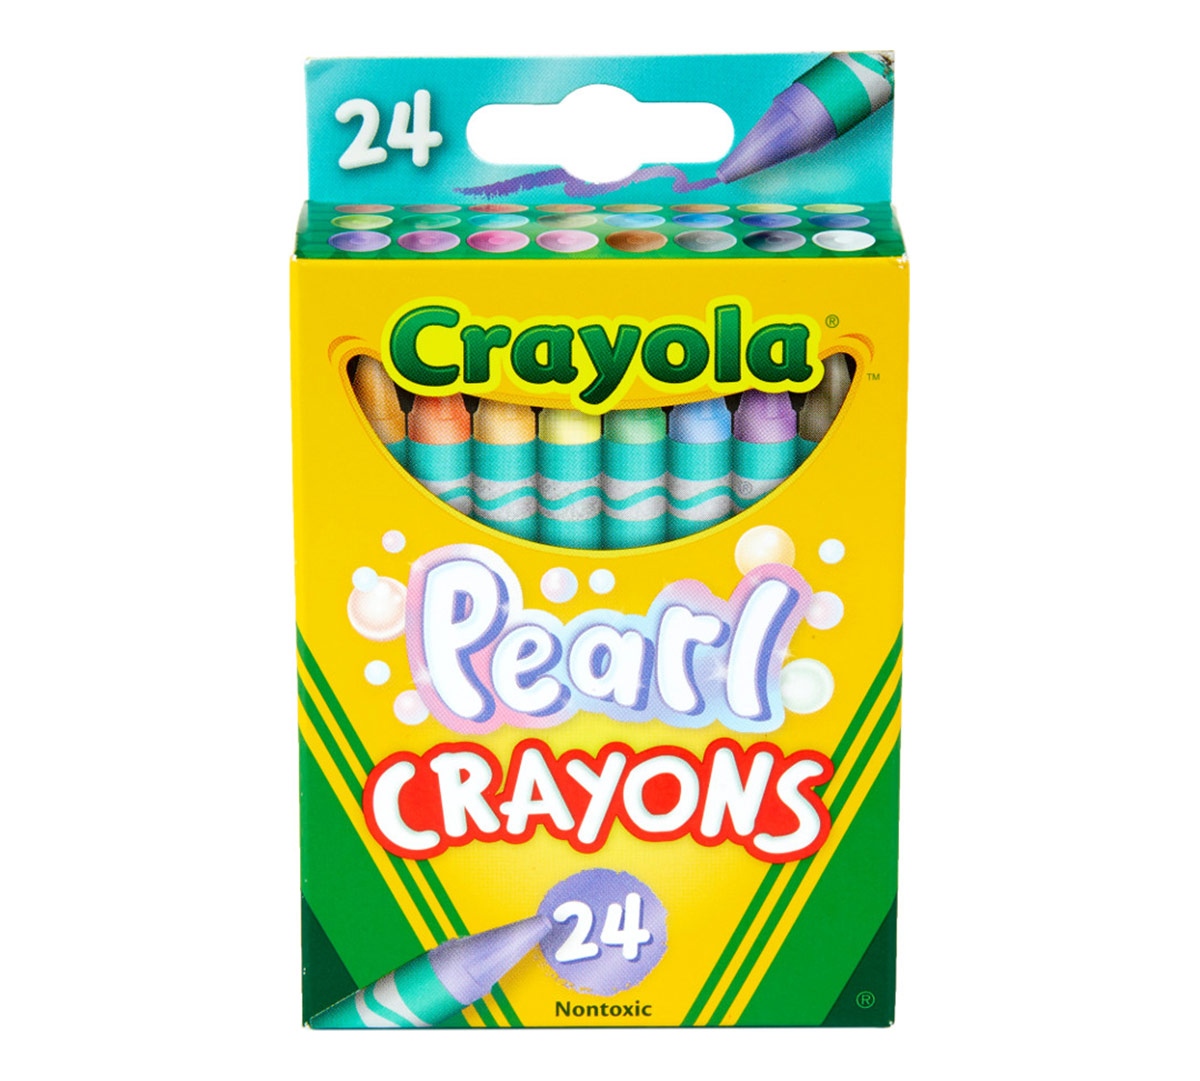 Glitter and Pearl Crayons 8 count each